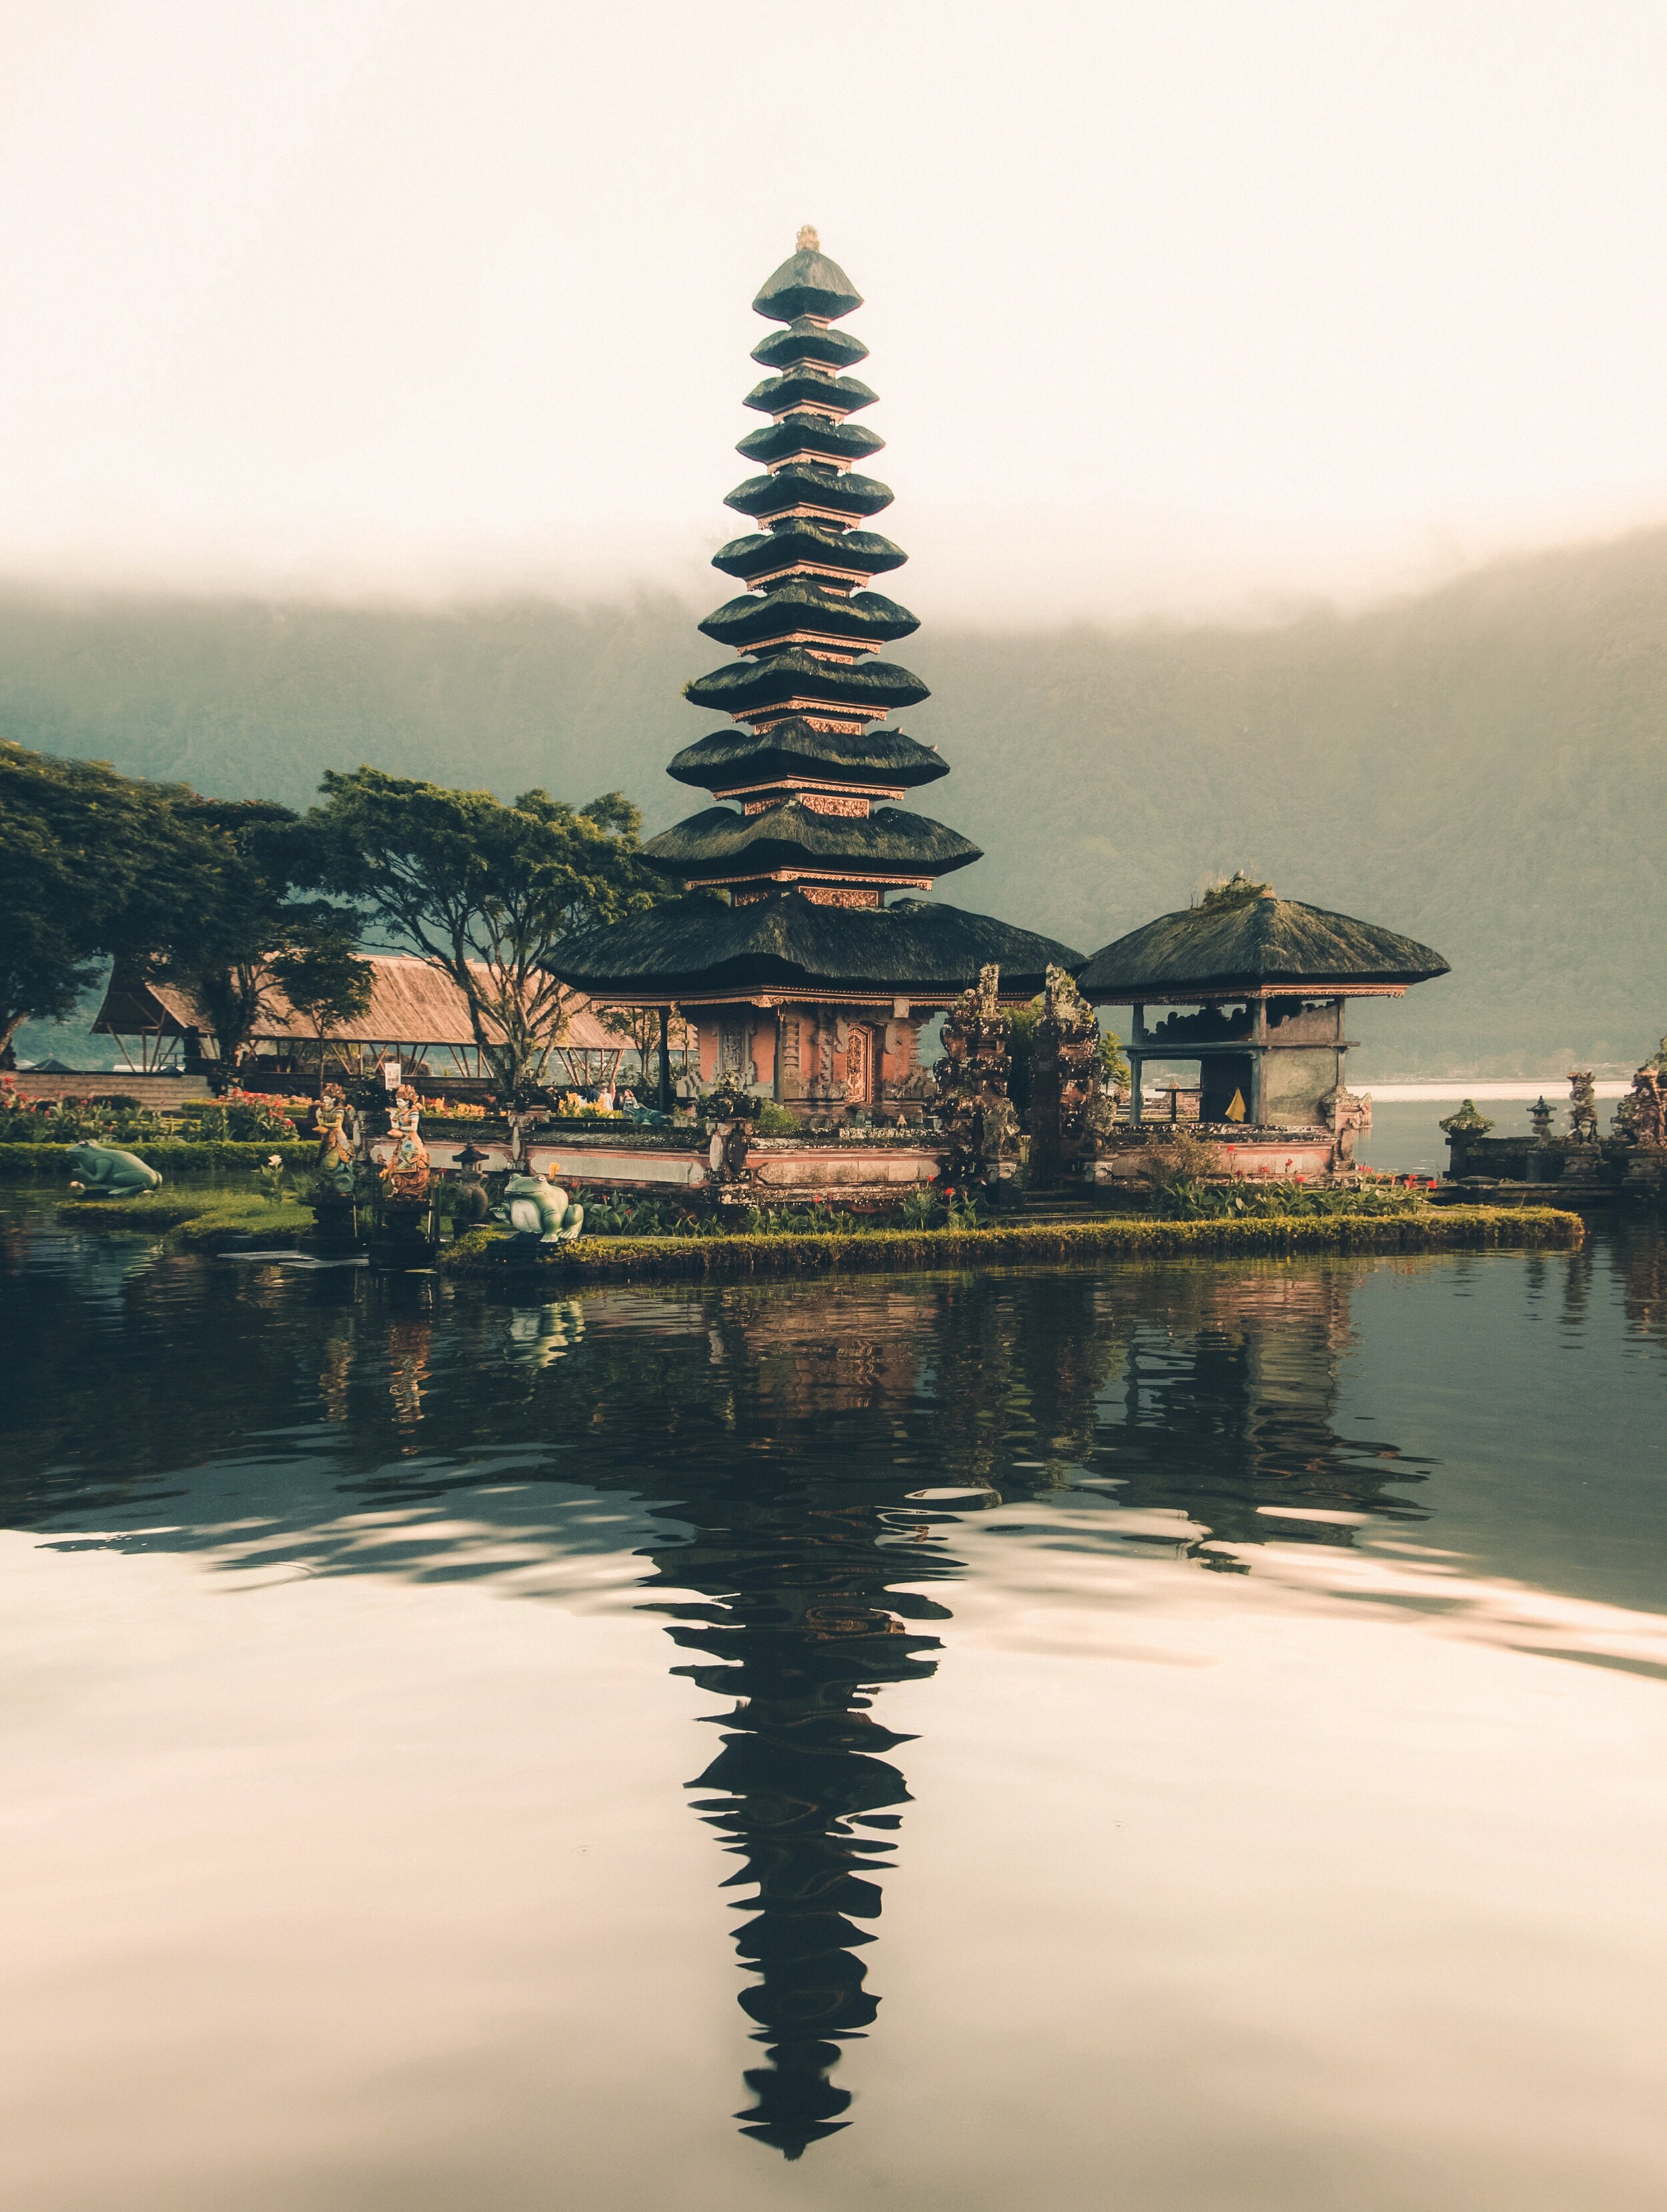 one of the places to visit in Bali